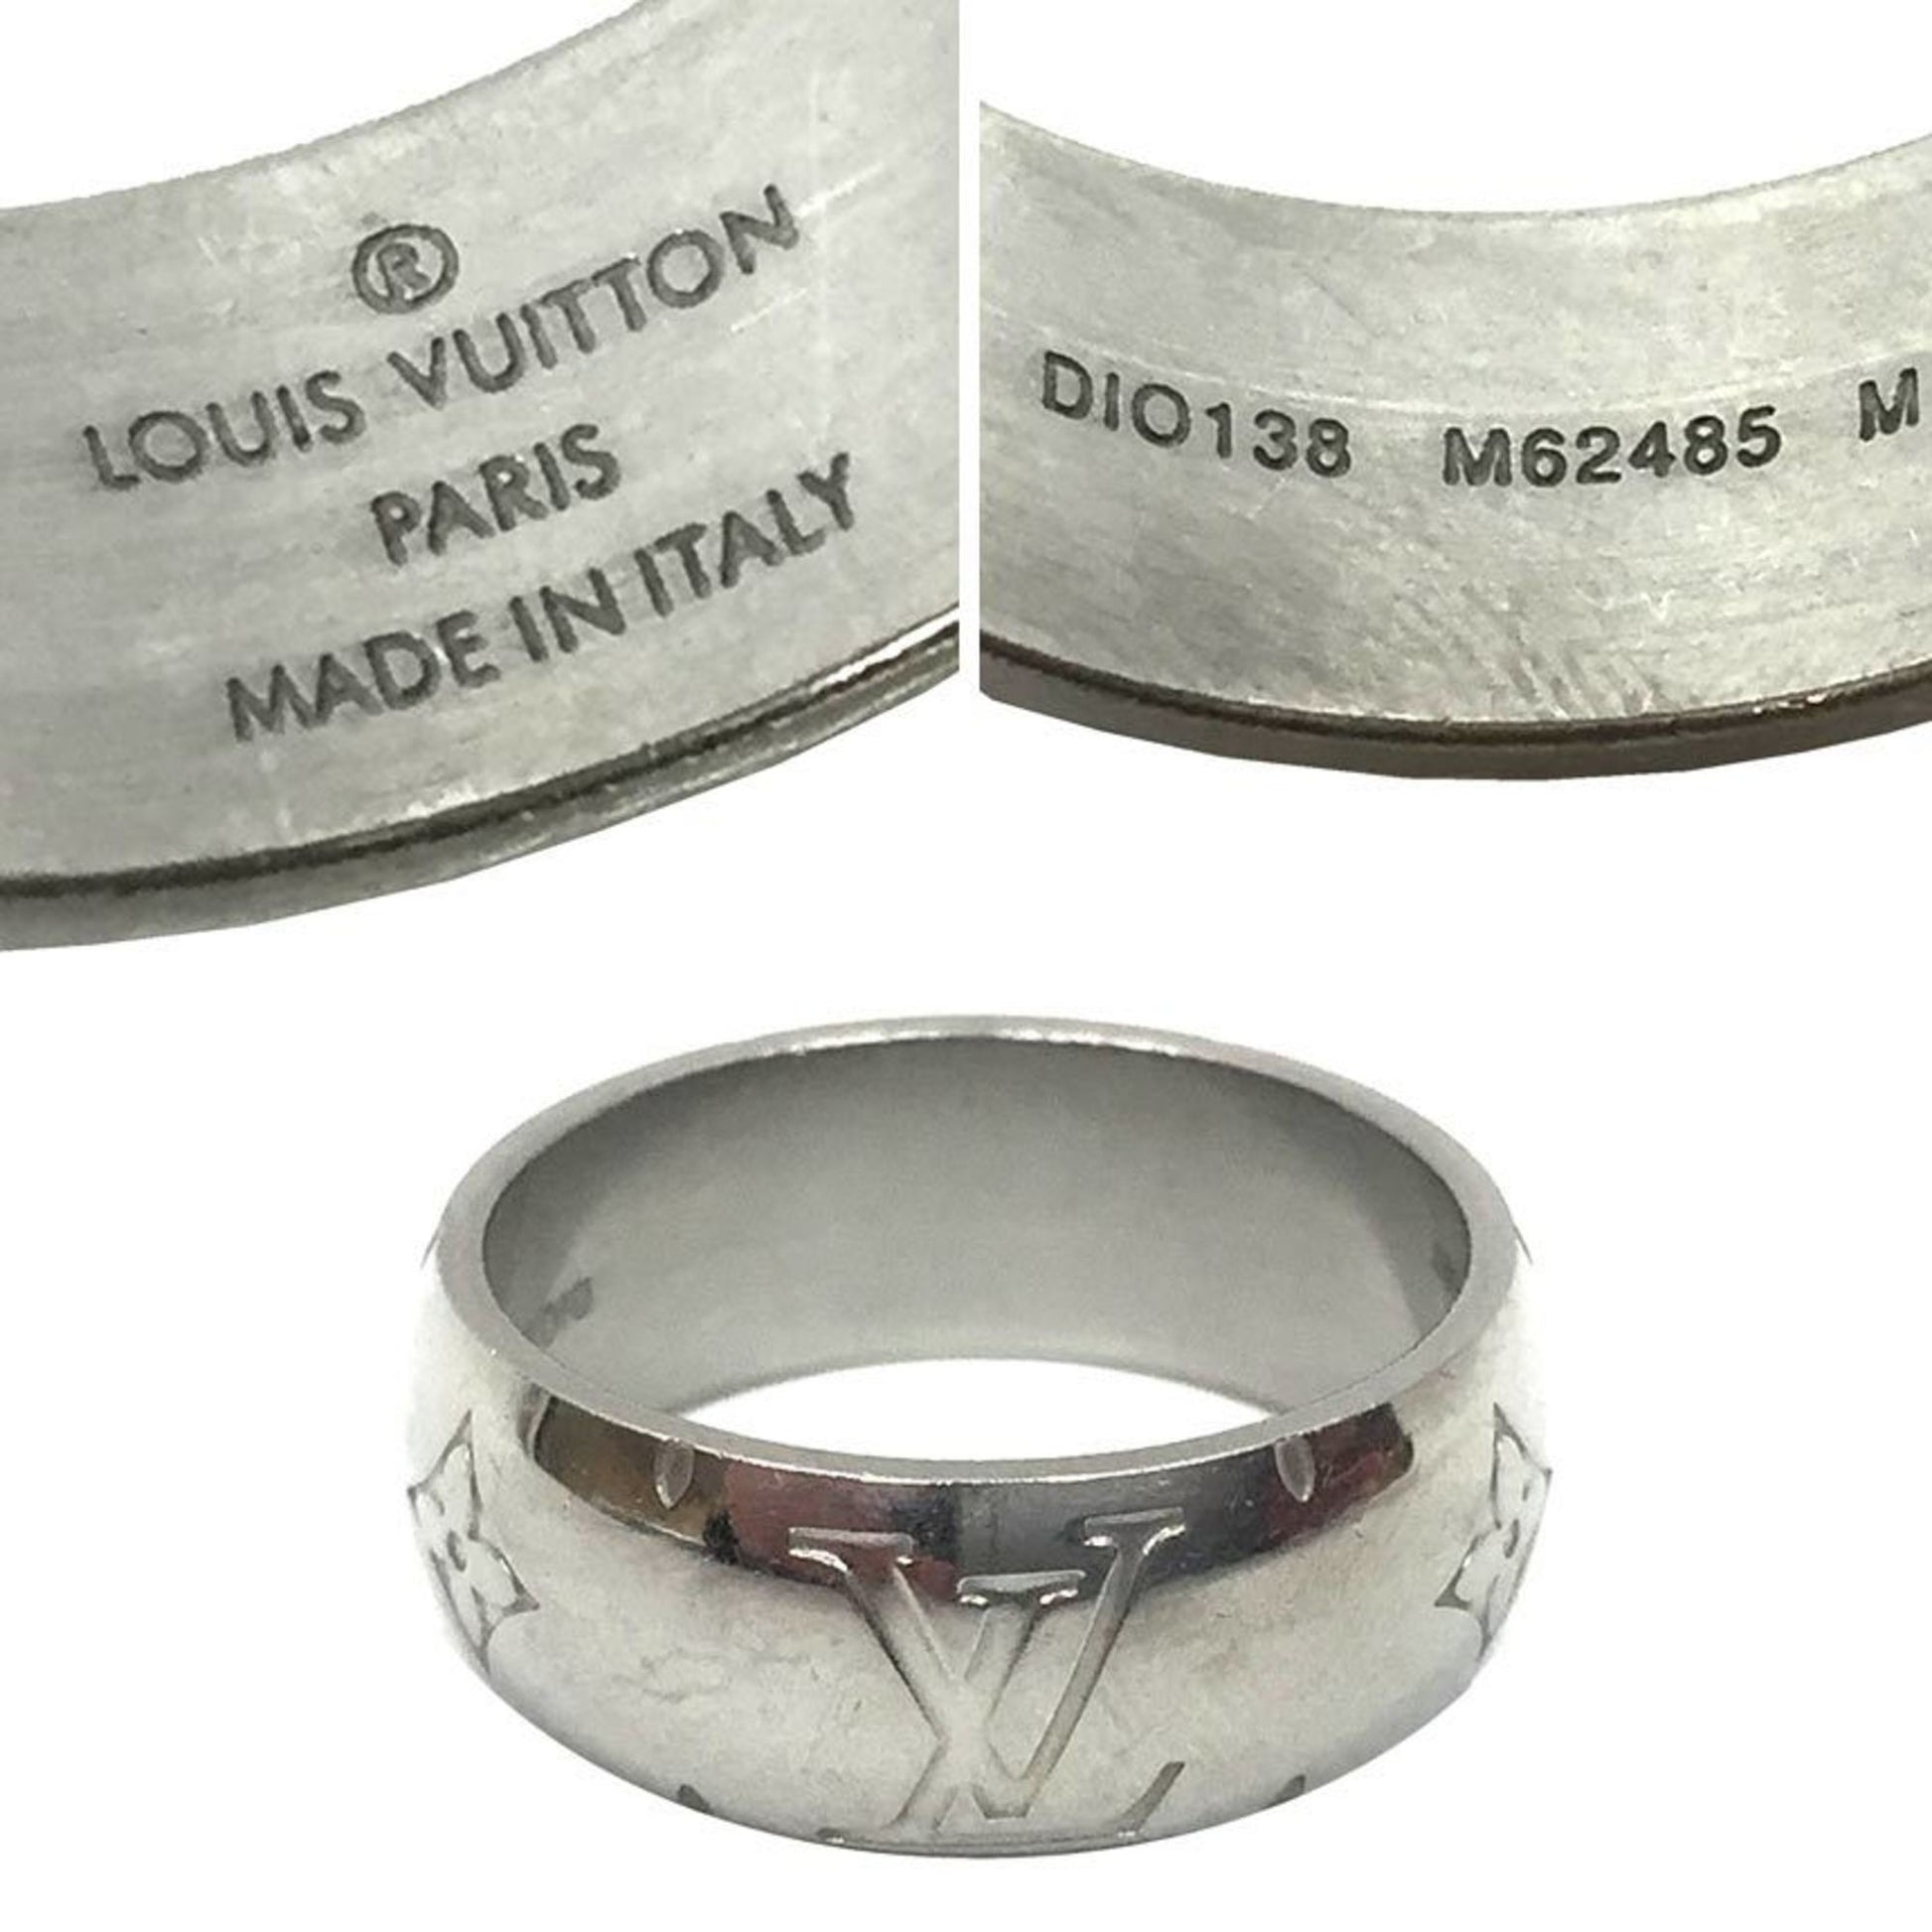 Authenticated Used Louis Vuitton monogram ring M62485 silver metal